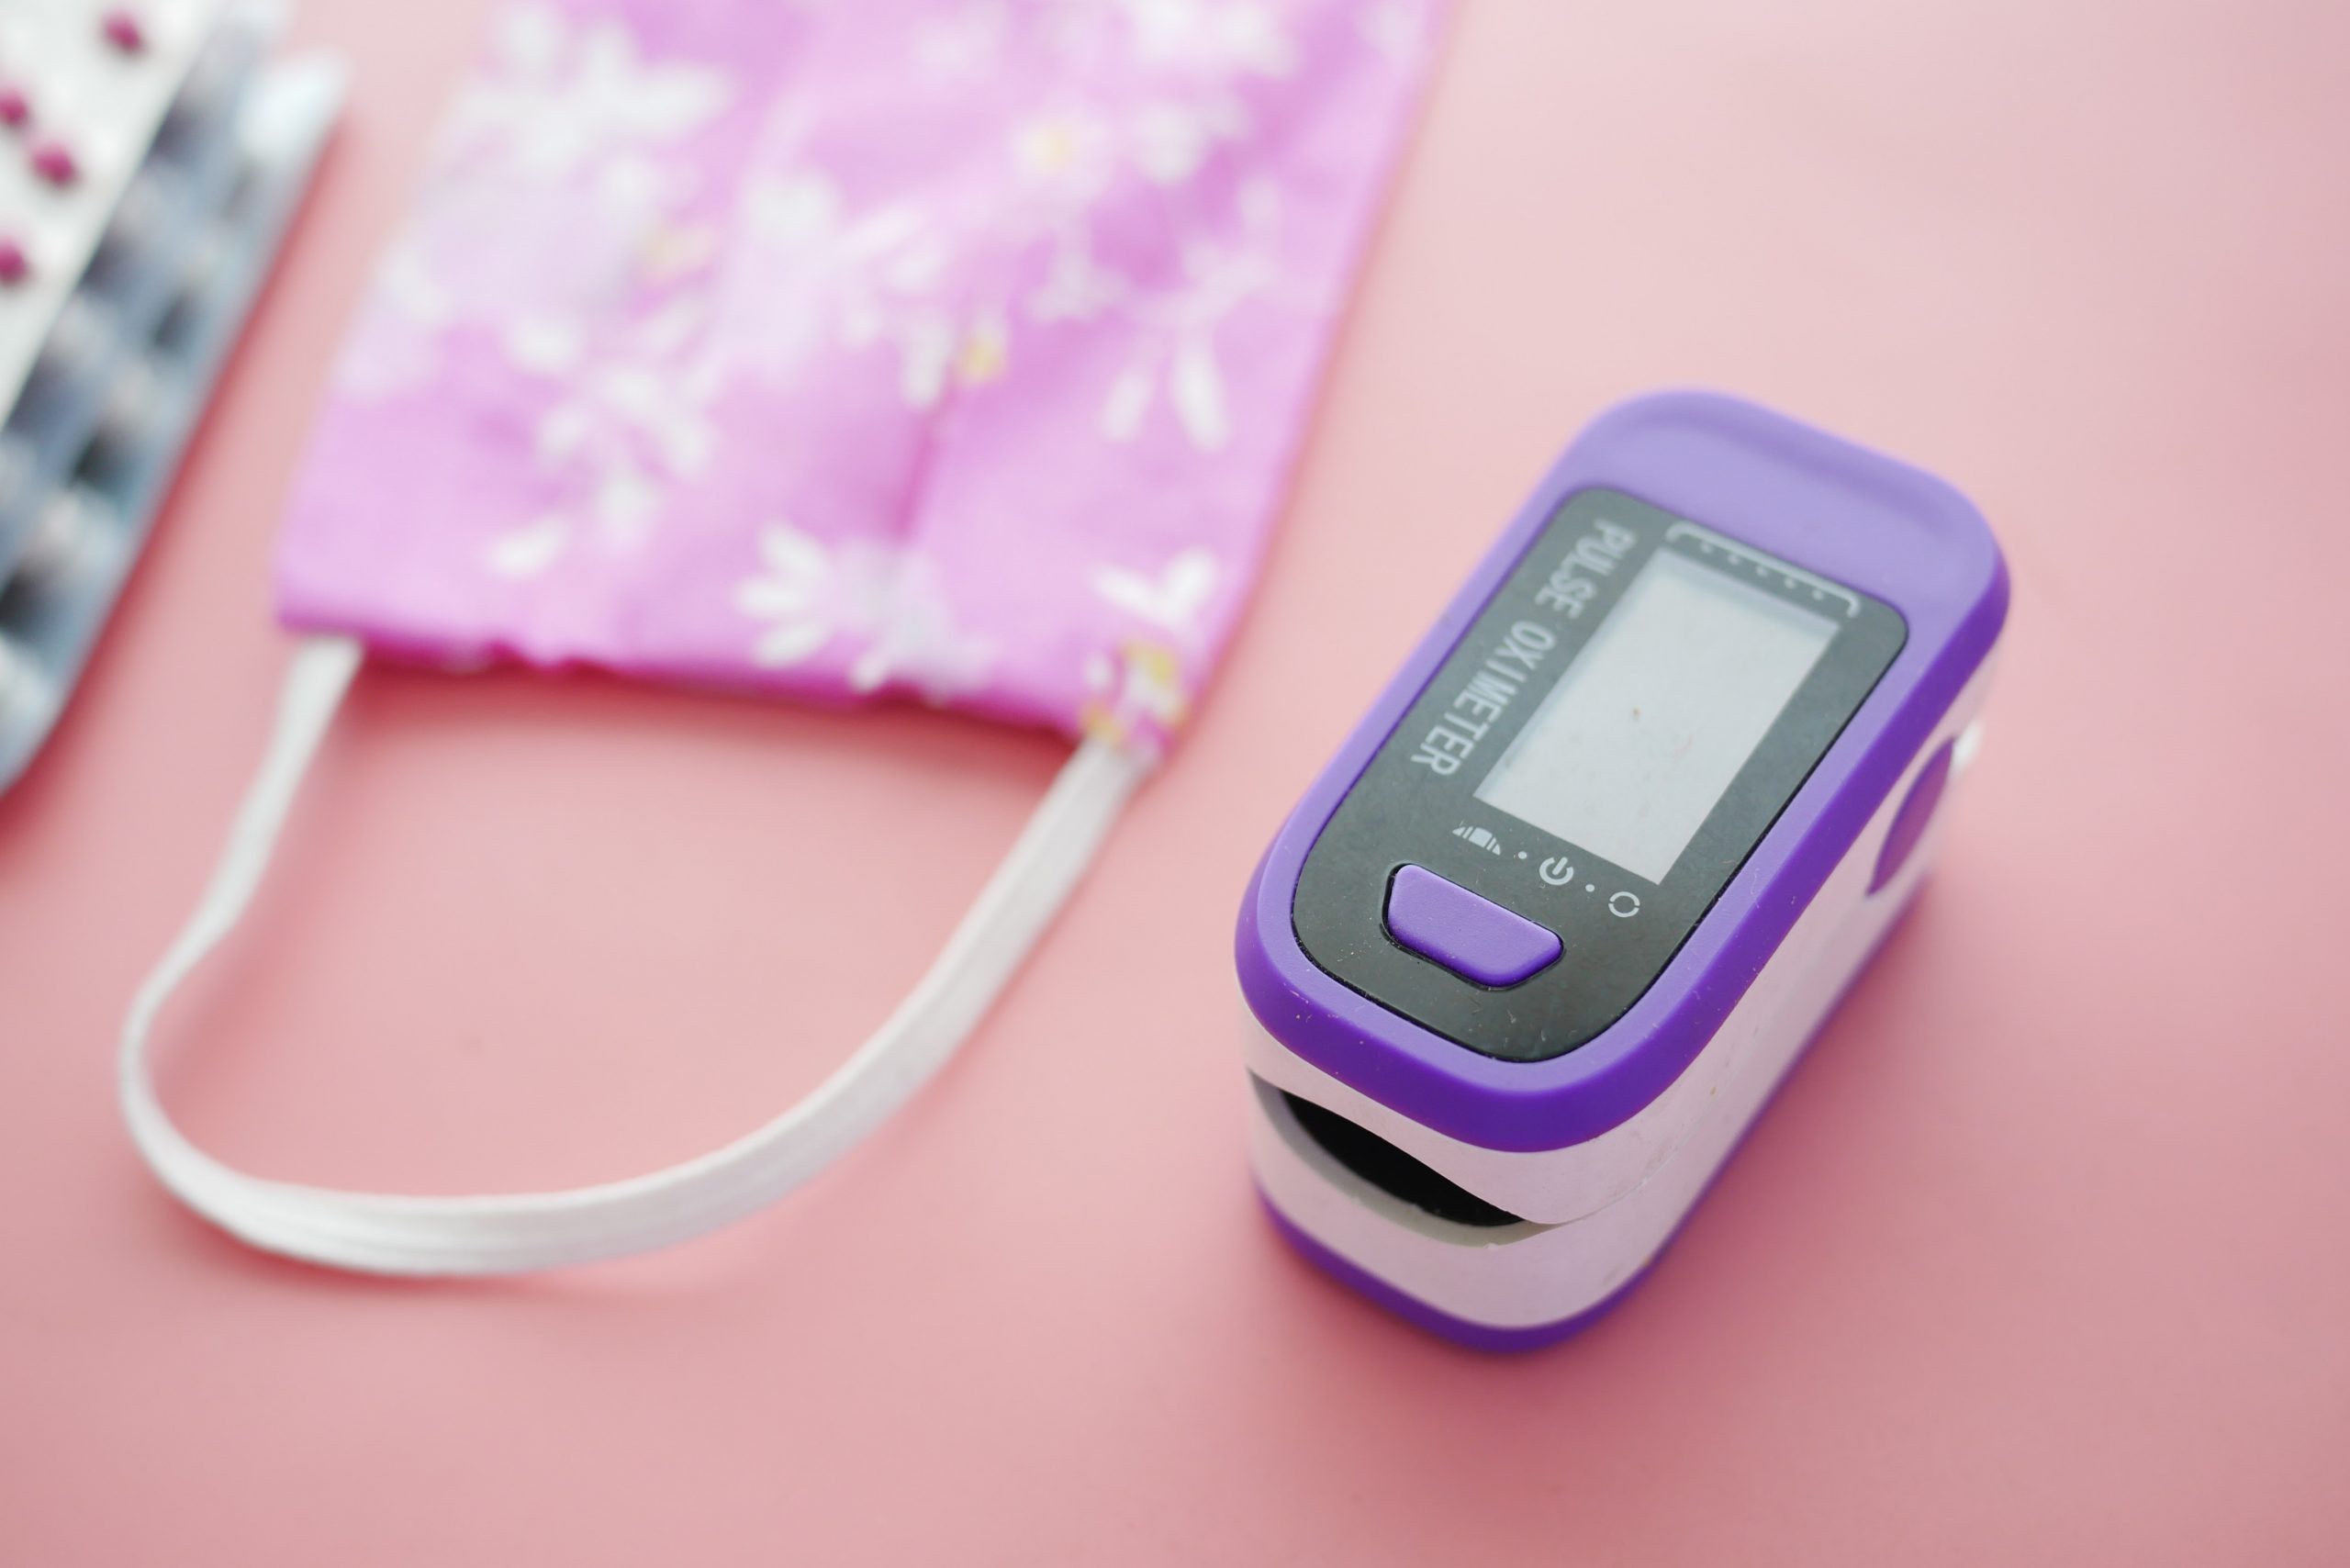 Pulse oximeter how to use it?